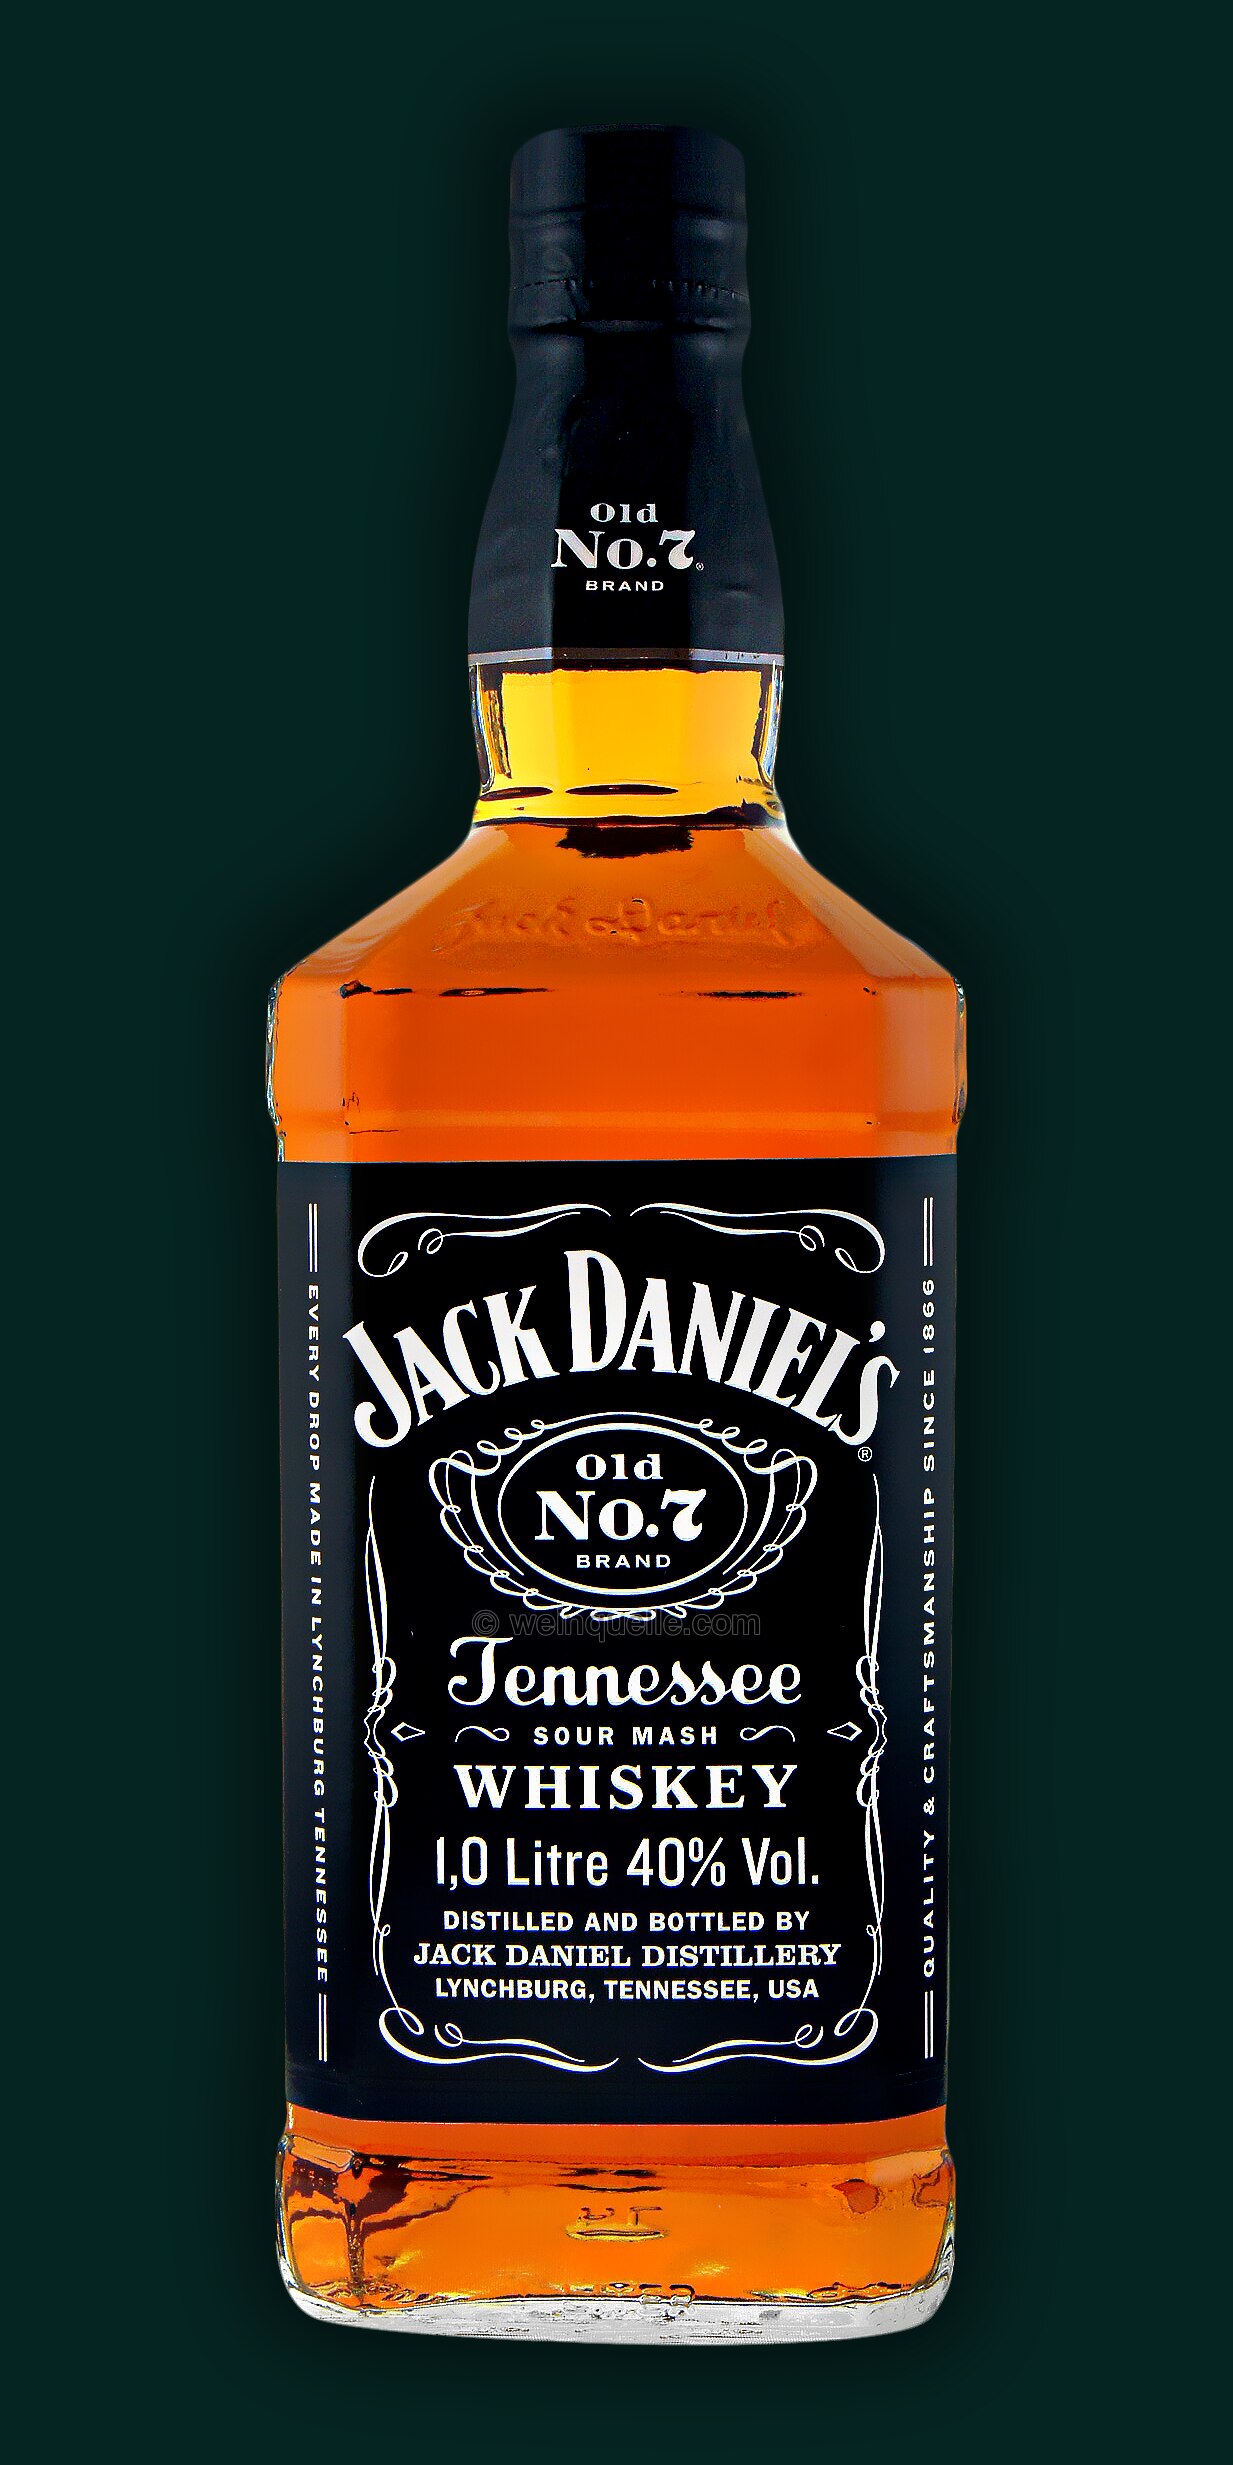 Jack Daniels Price 1 Liter How do you Price a Switches?